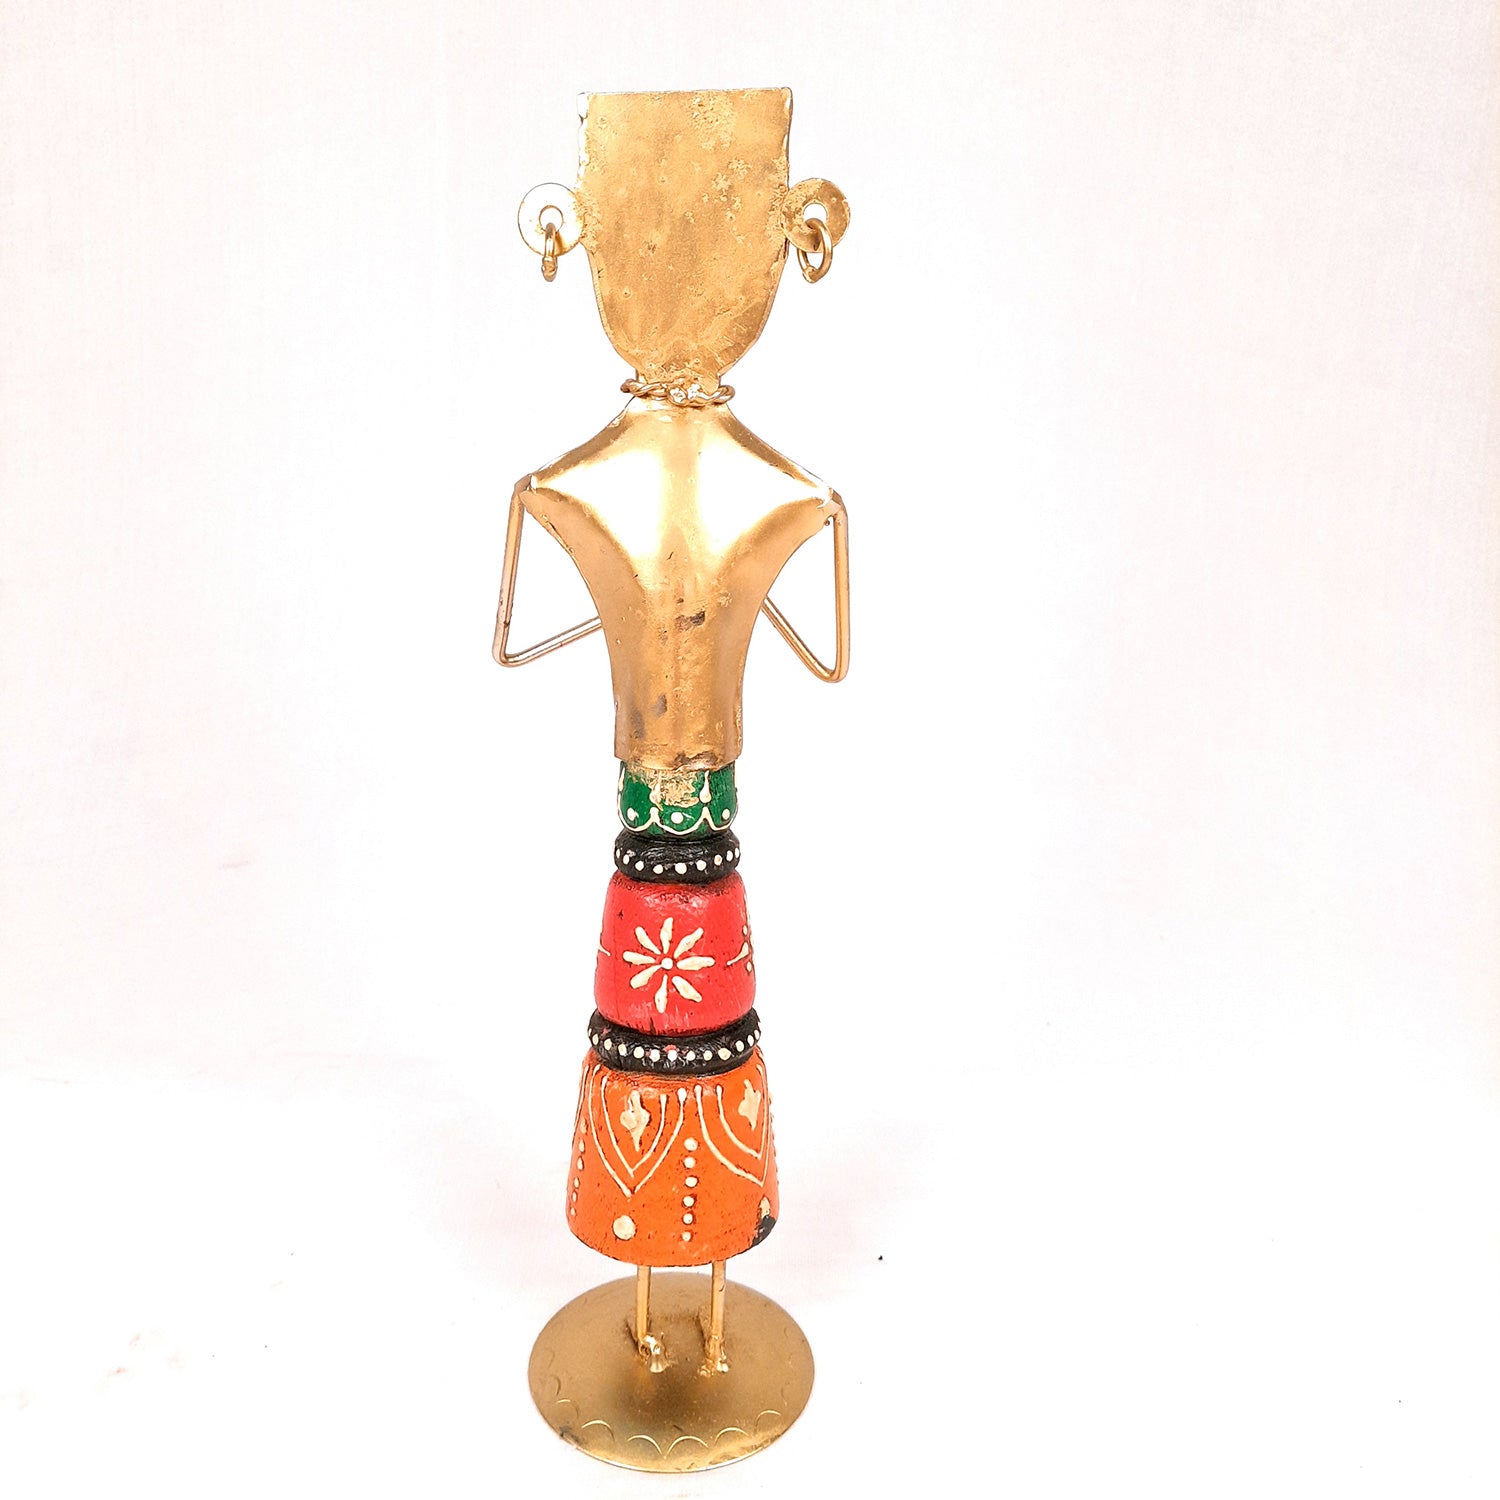 Showpiece Musician Figurine | Tribal Musician Figurine - For Home, Table, Living Room & TV Unit | Show Piece For Office Desk & Gifts - 12 Inch - Apkamart